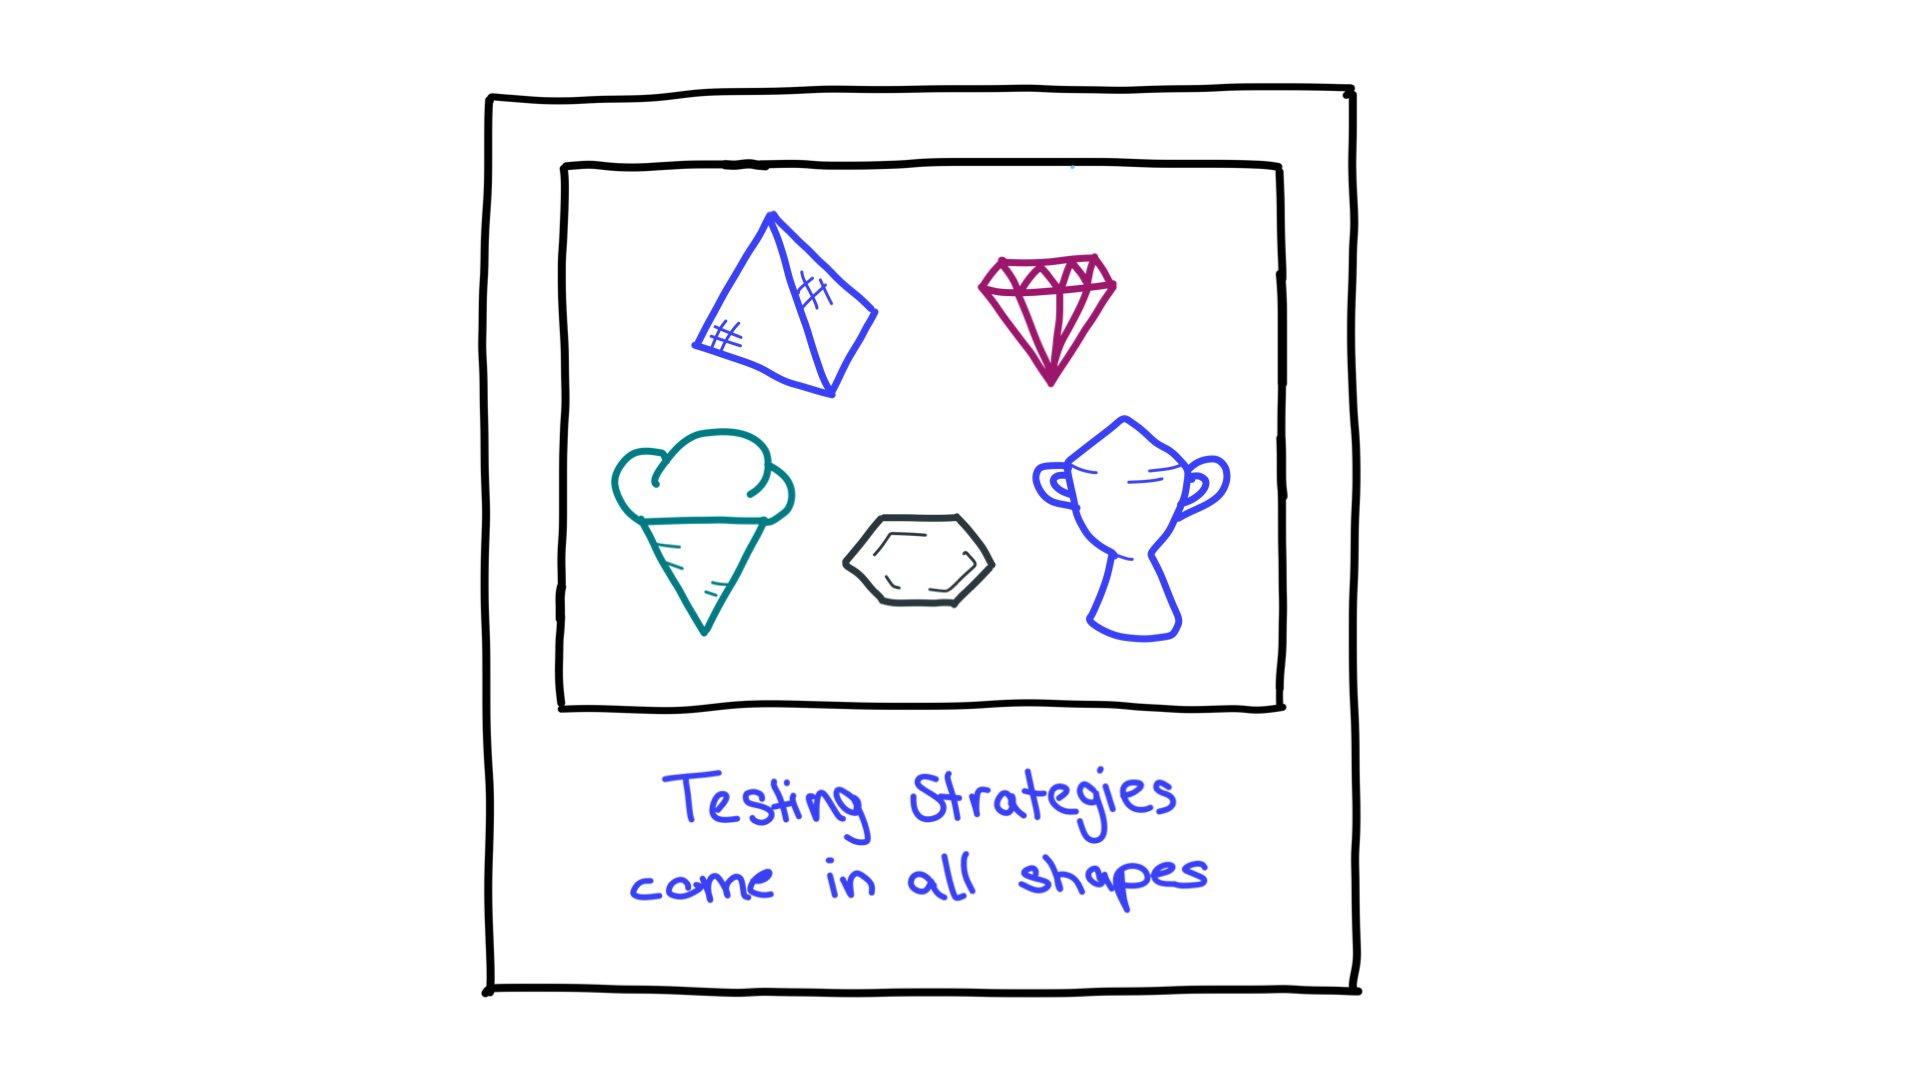 Some examples of testing
    strategy shapes: a pyramid, a cut diamond, an ice cream cone, a hexagon, and
    a trophy.